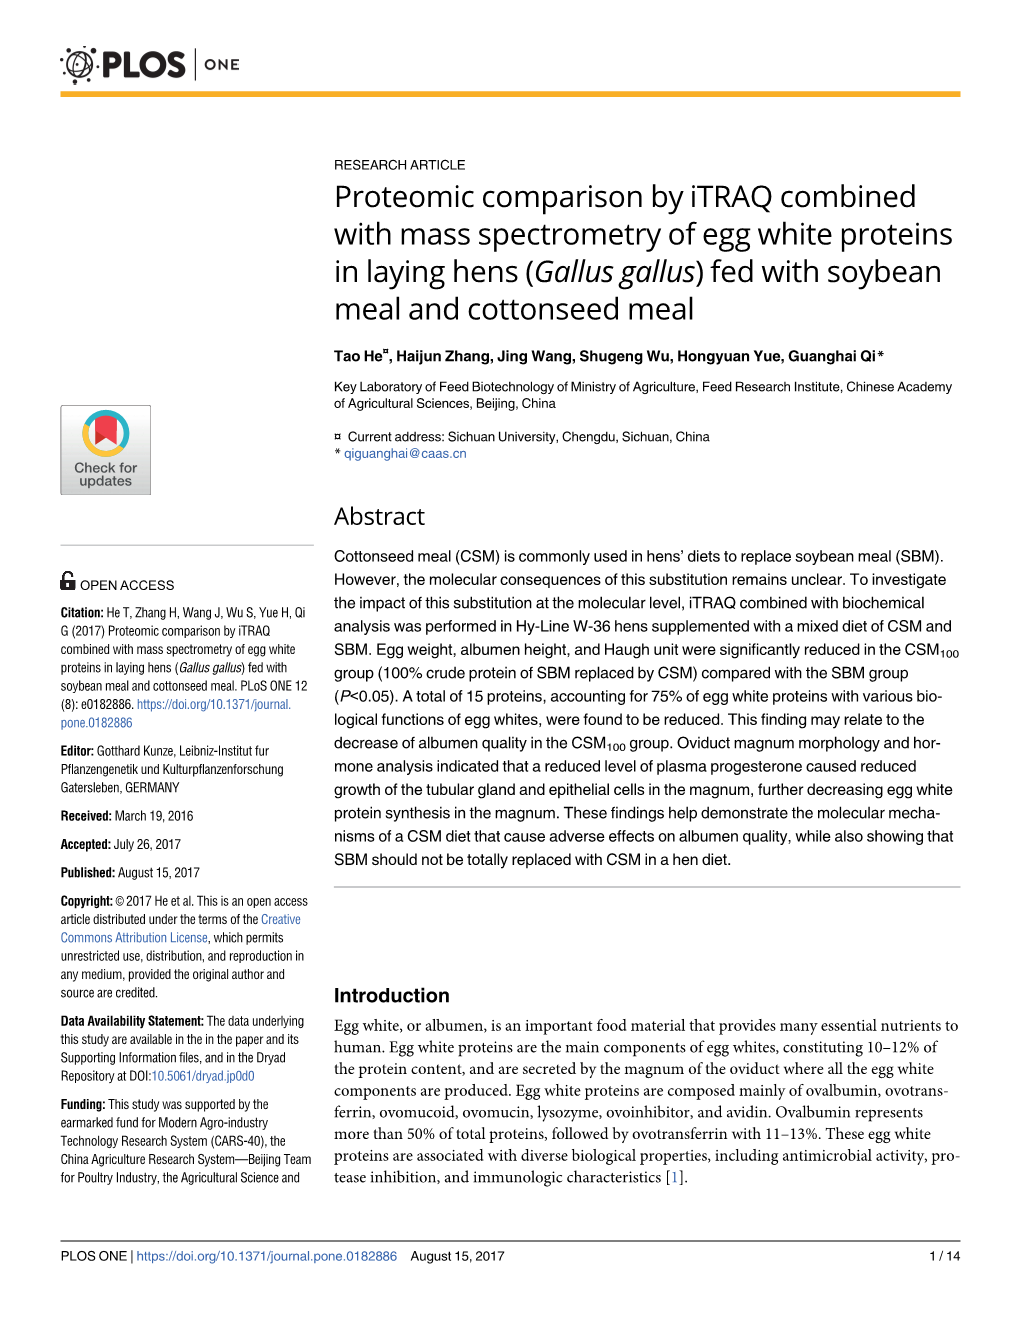 Proteomic Comparison by Itraq Combined with Mass Spectrometry of Egg White Proteins in Laying Hens (Gallus Gallus) Fed with Soybean Meal and Cottonseed Meal